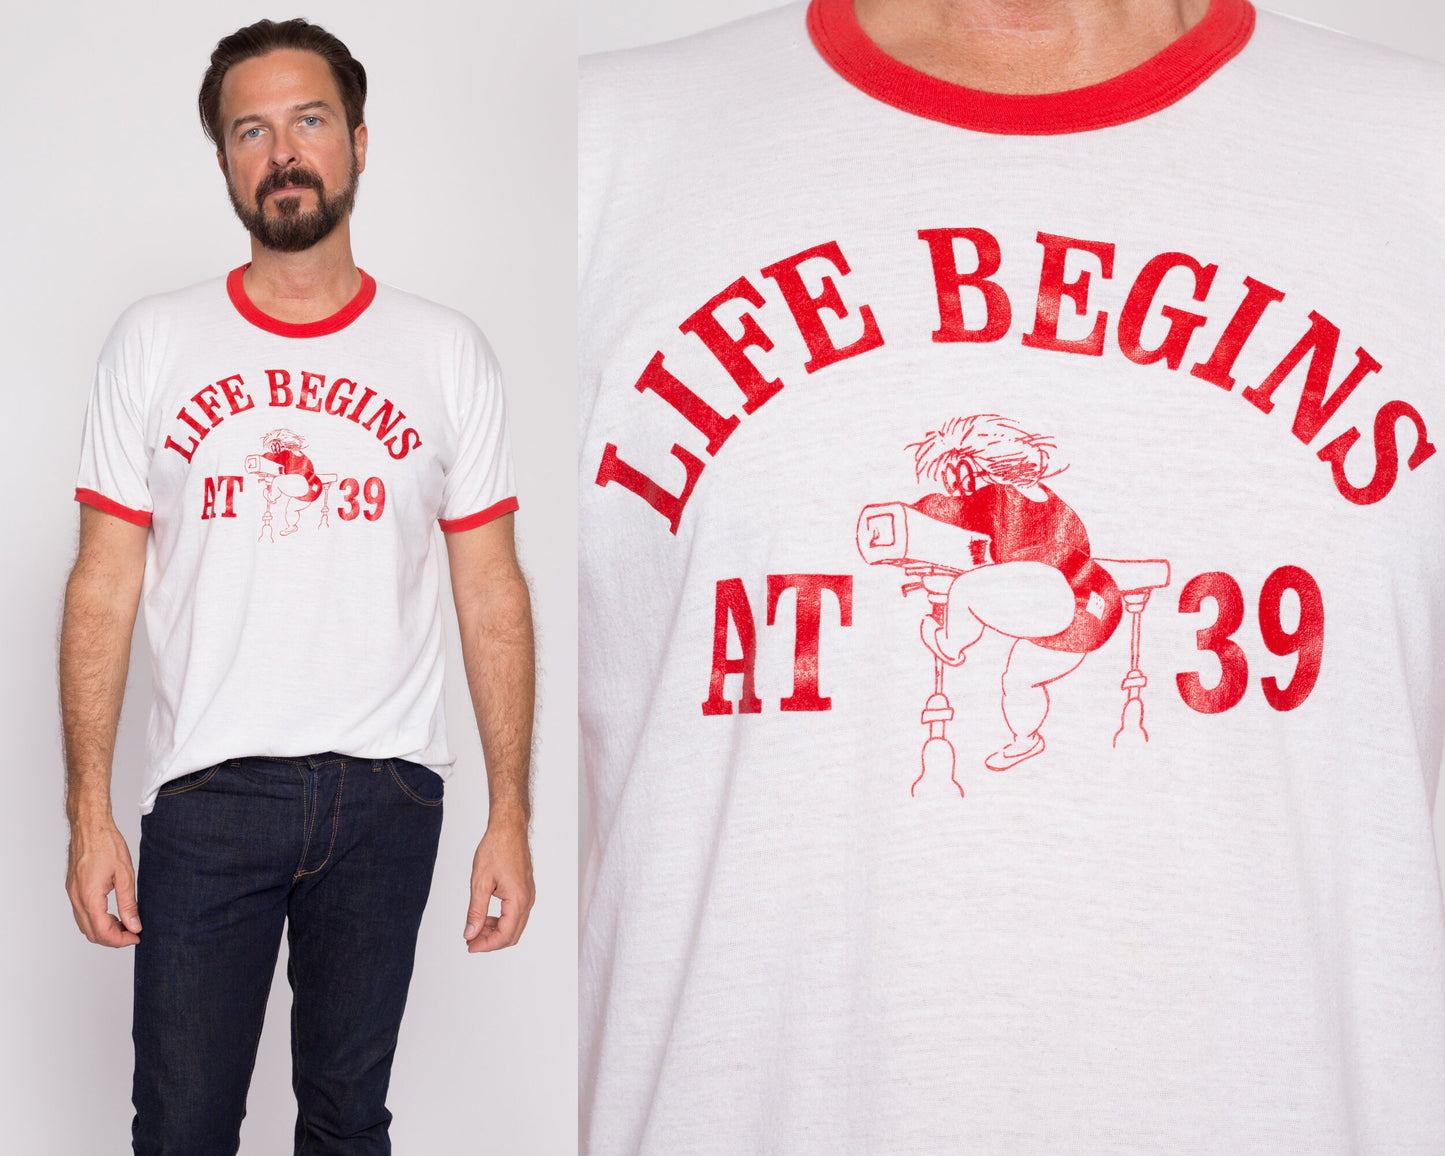 L| 80s "Life Begins At 39" Funny Birthday T Shirt - Men's Large | Vintage White Red Gymnast Graphic Ringer Tee